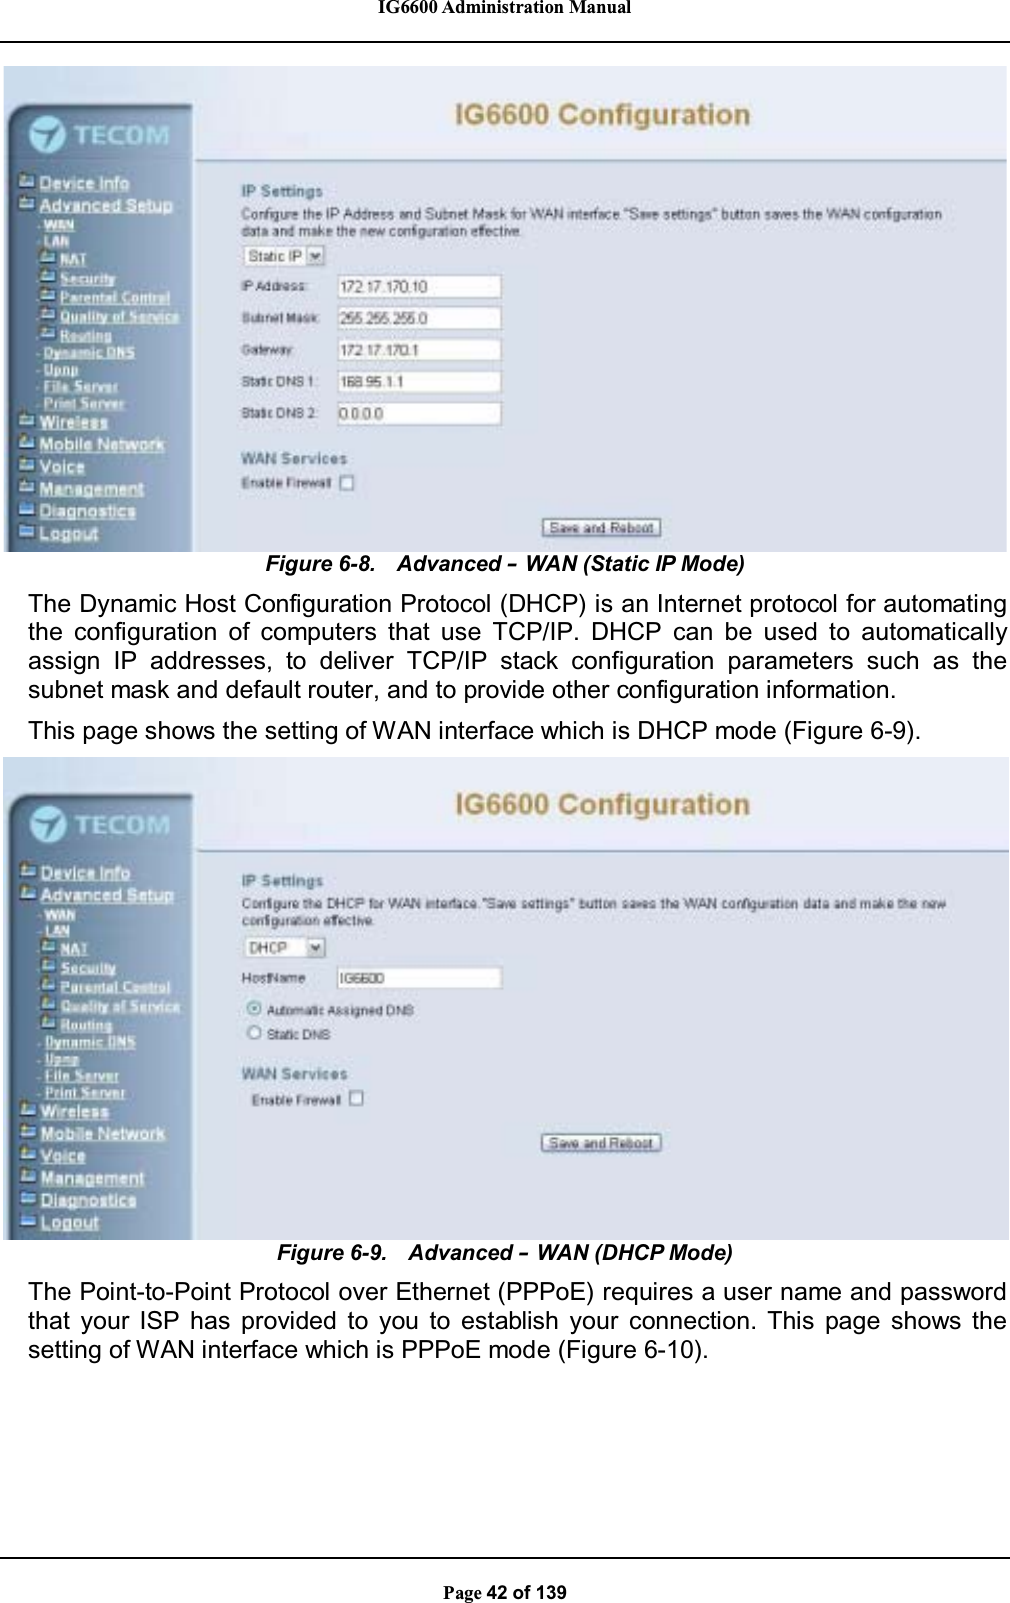 IG6600 Administration ManualPage 42 of 139Figure 6-8. Advanced –WAN (Static IP Mode)The Dynamic Host Configuration Protocol (DHCP) is an Internet protocol for automatingthe configuration of computers that use TCP/IP. DHCP can be used to automaticallyassign IP addresses, to deliver TCP/IP stack configuration parameters such as thesubnet mask and default router, and to provide other configuration information.This page shows the setting of WAN interface which is DHCP mode (Figure 6-9).Figure 6-9. Advanced –WAN (DHCP Mode)The Point-to-Point Protocol over Ethernet (PPPoE) requires a user name and passwordthat your ISP has provided to you to establish your connection. This page shows thesetting of WAN interface which is PPPoE mode (Figure 6-10).